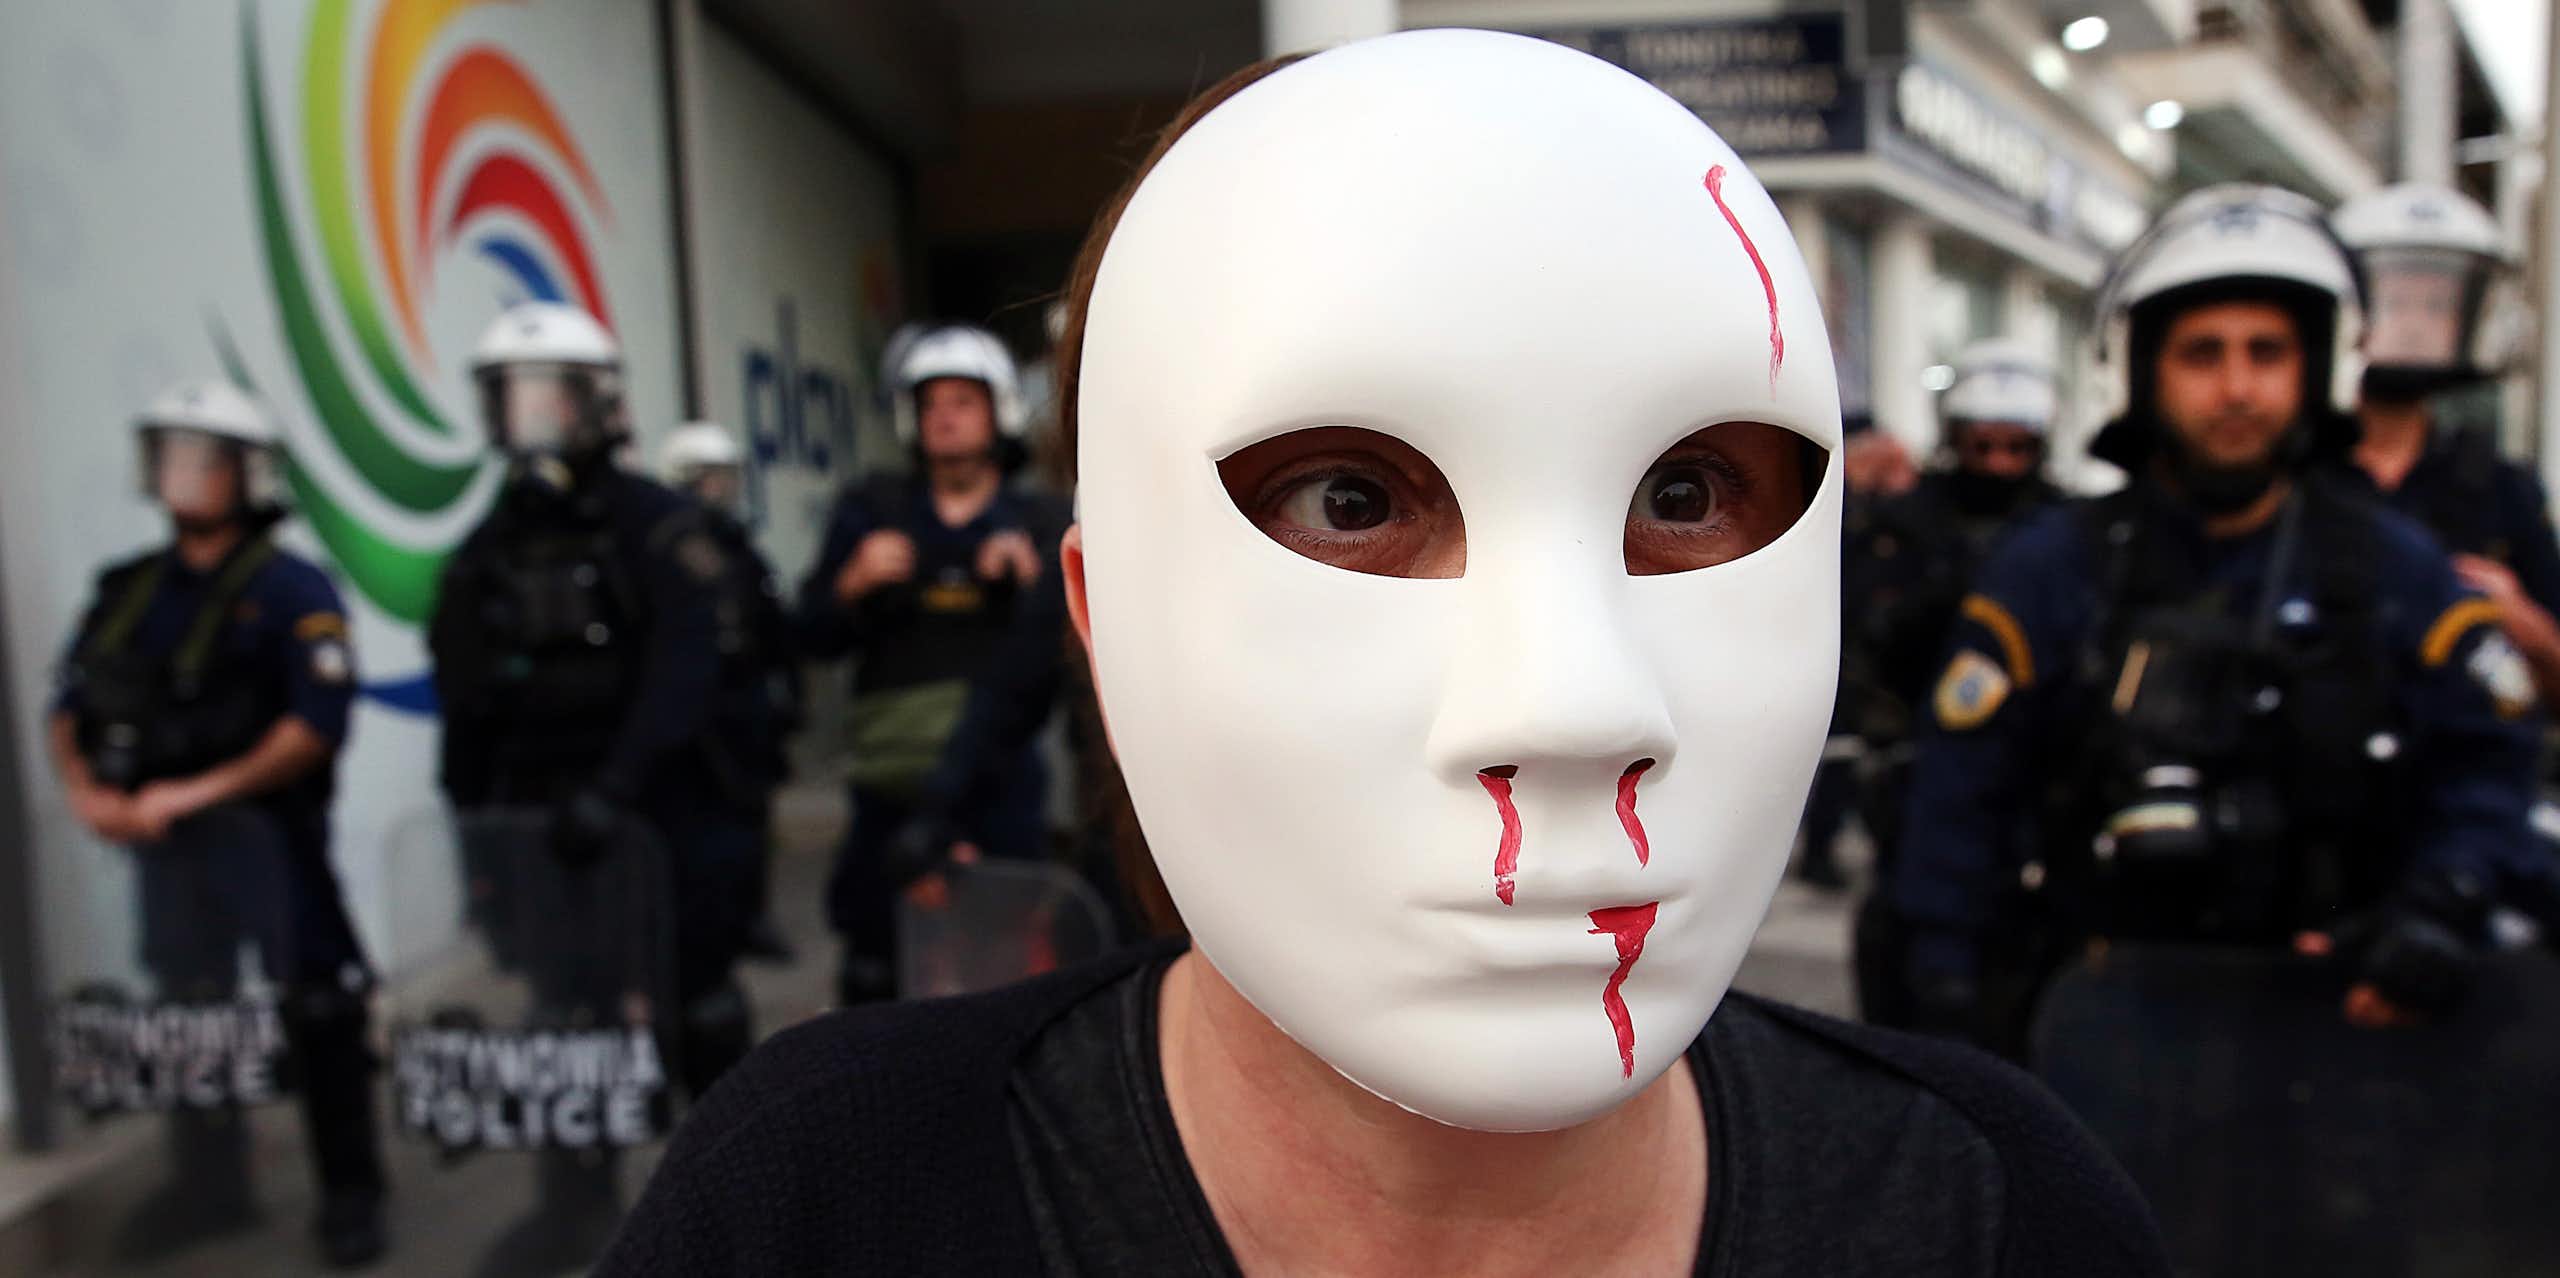 A protester standing in front of police, wearing a white mask with fake blood coming from its nose and mouth